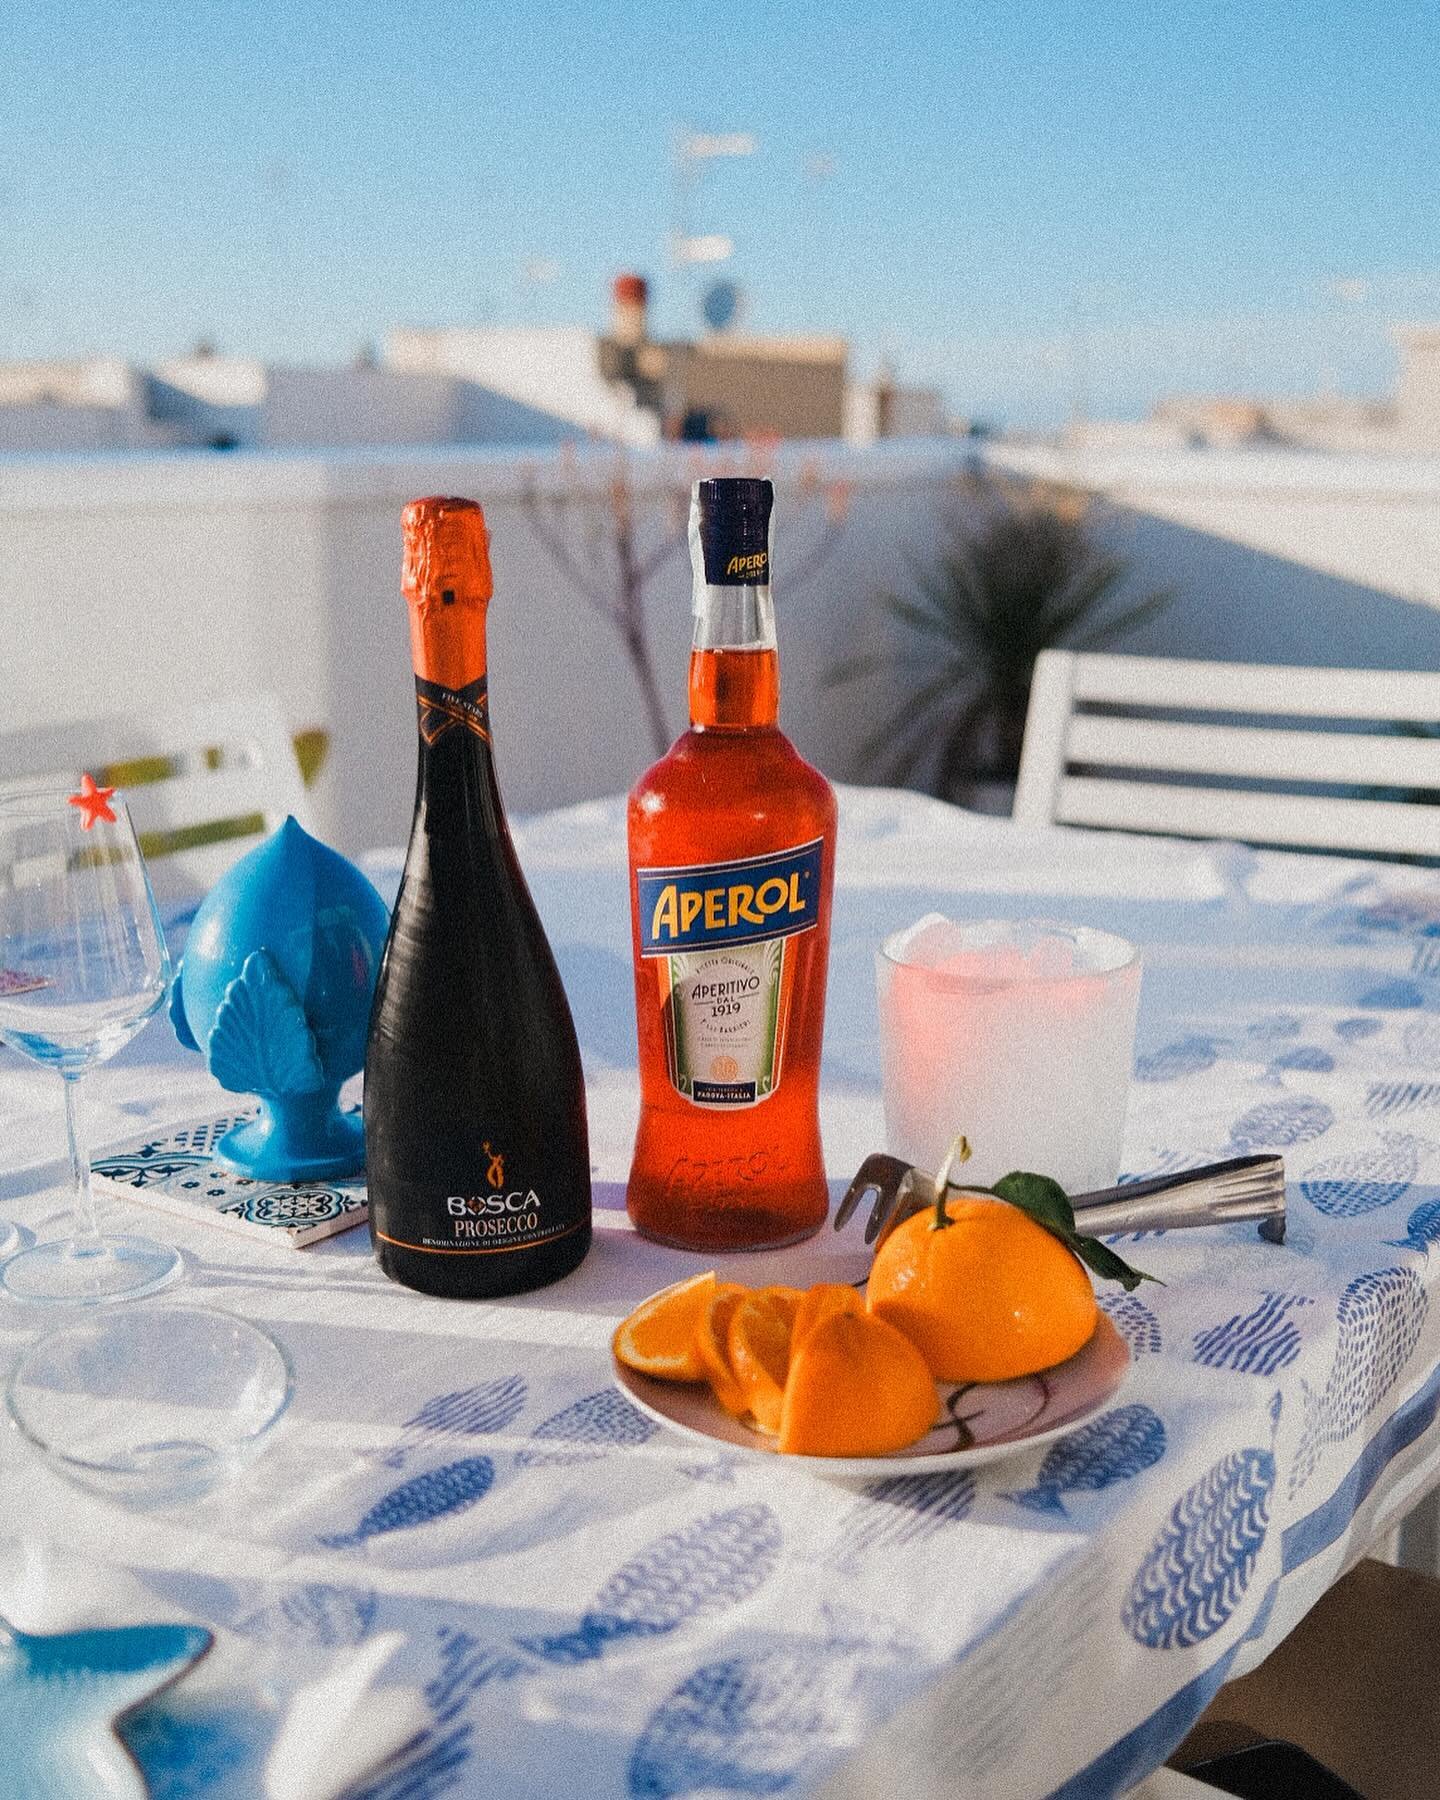 One of my favorite things we did in Polignano a Mare was take a rooftop cooking class! We learned how to make 🍊 aperol spritzes, 🍅 traditional panzerotti, and ☕️ tiramisu with the lovely @not_only_panzerotti_! We found her on Airbnb Experiences and